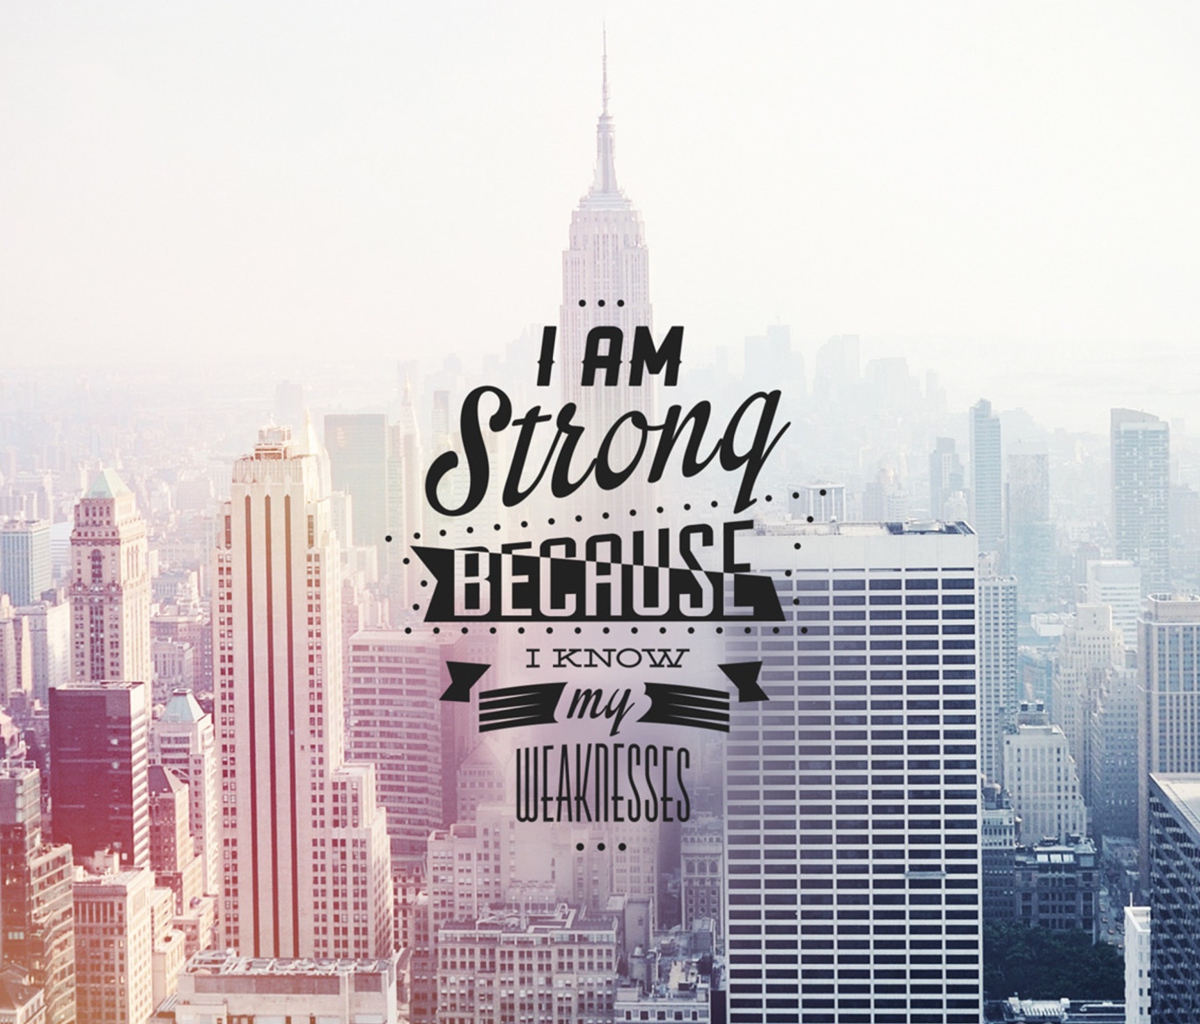 Fondo de pantalla I am strong because i know my weakness 1200x1024